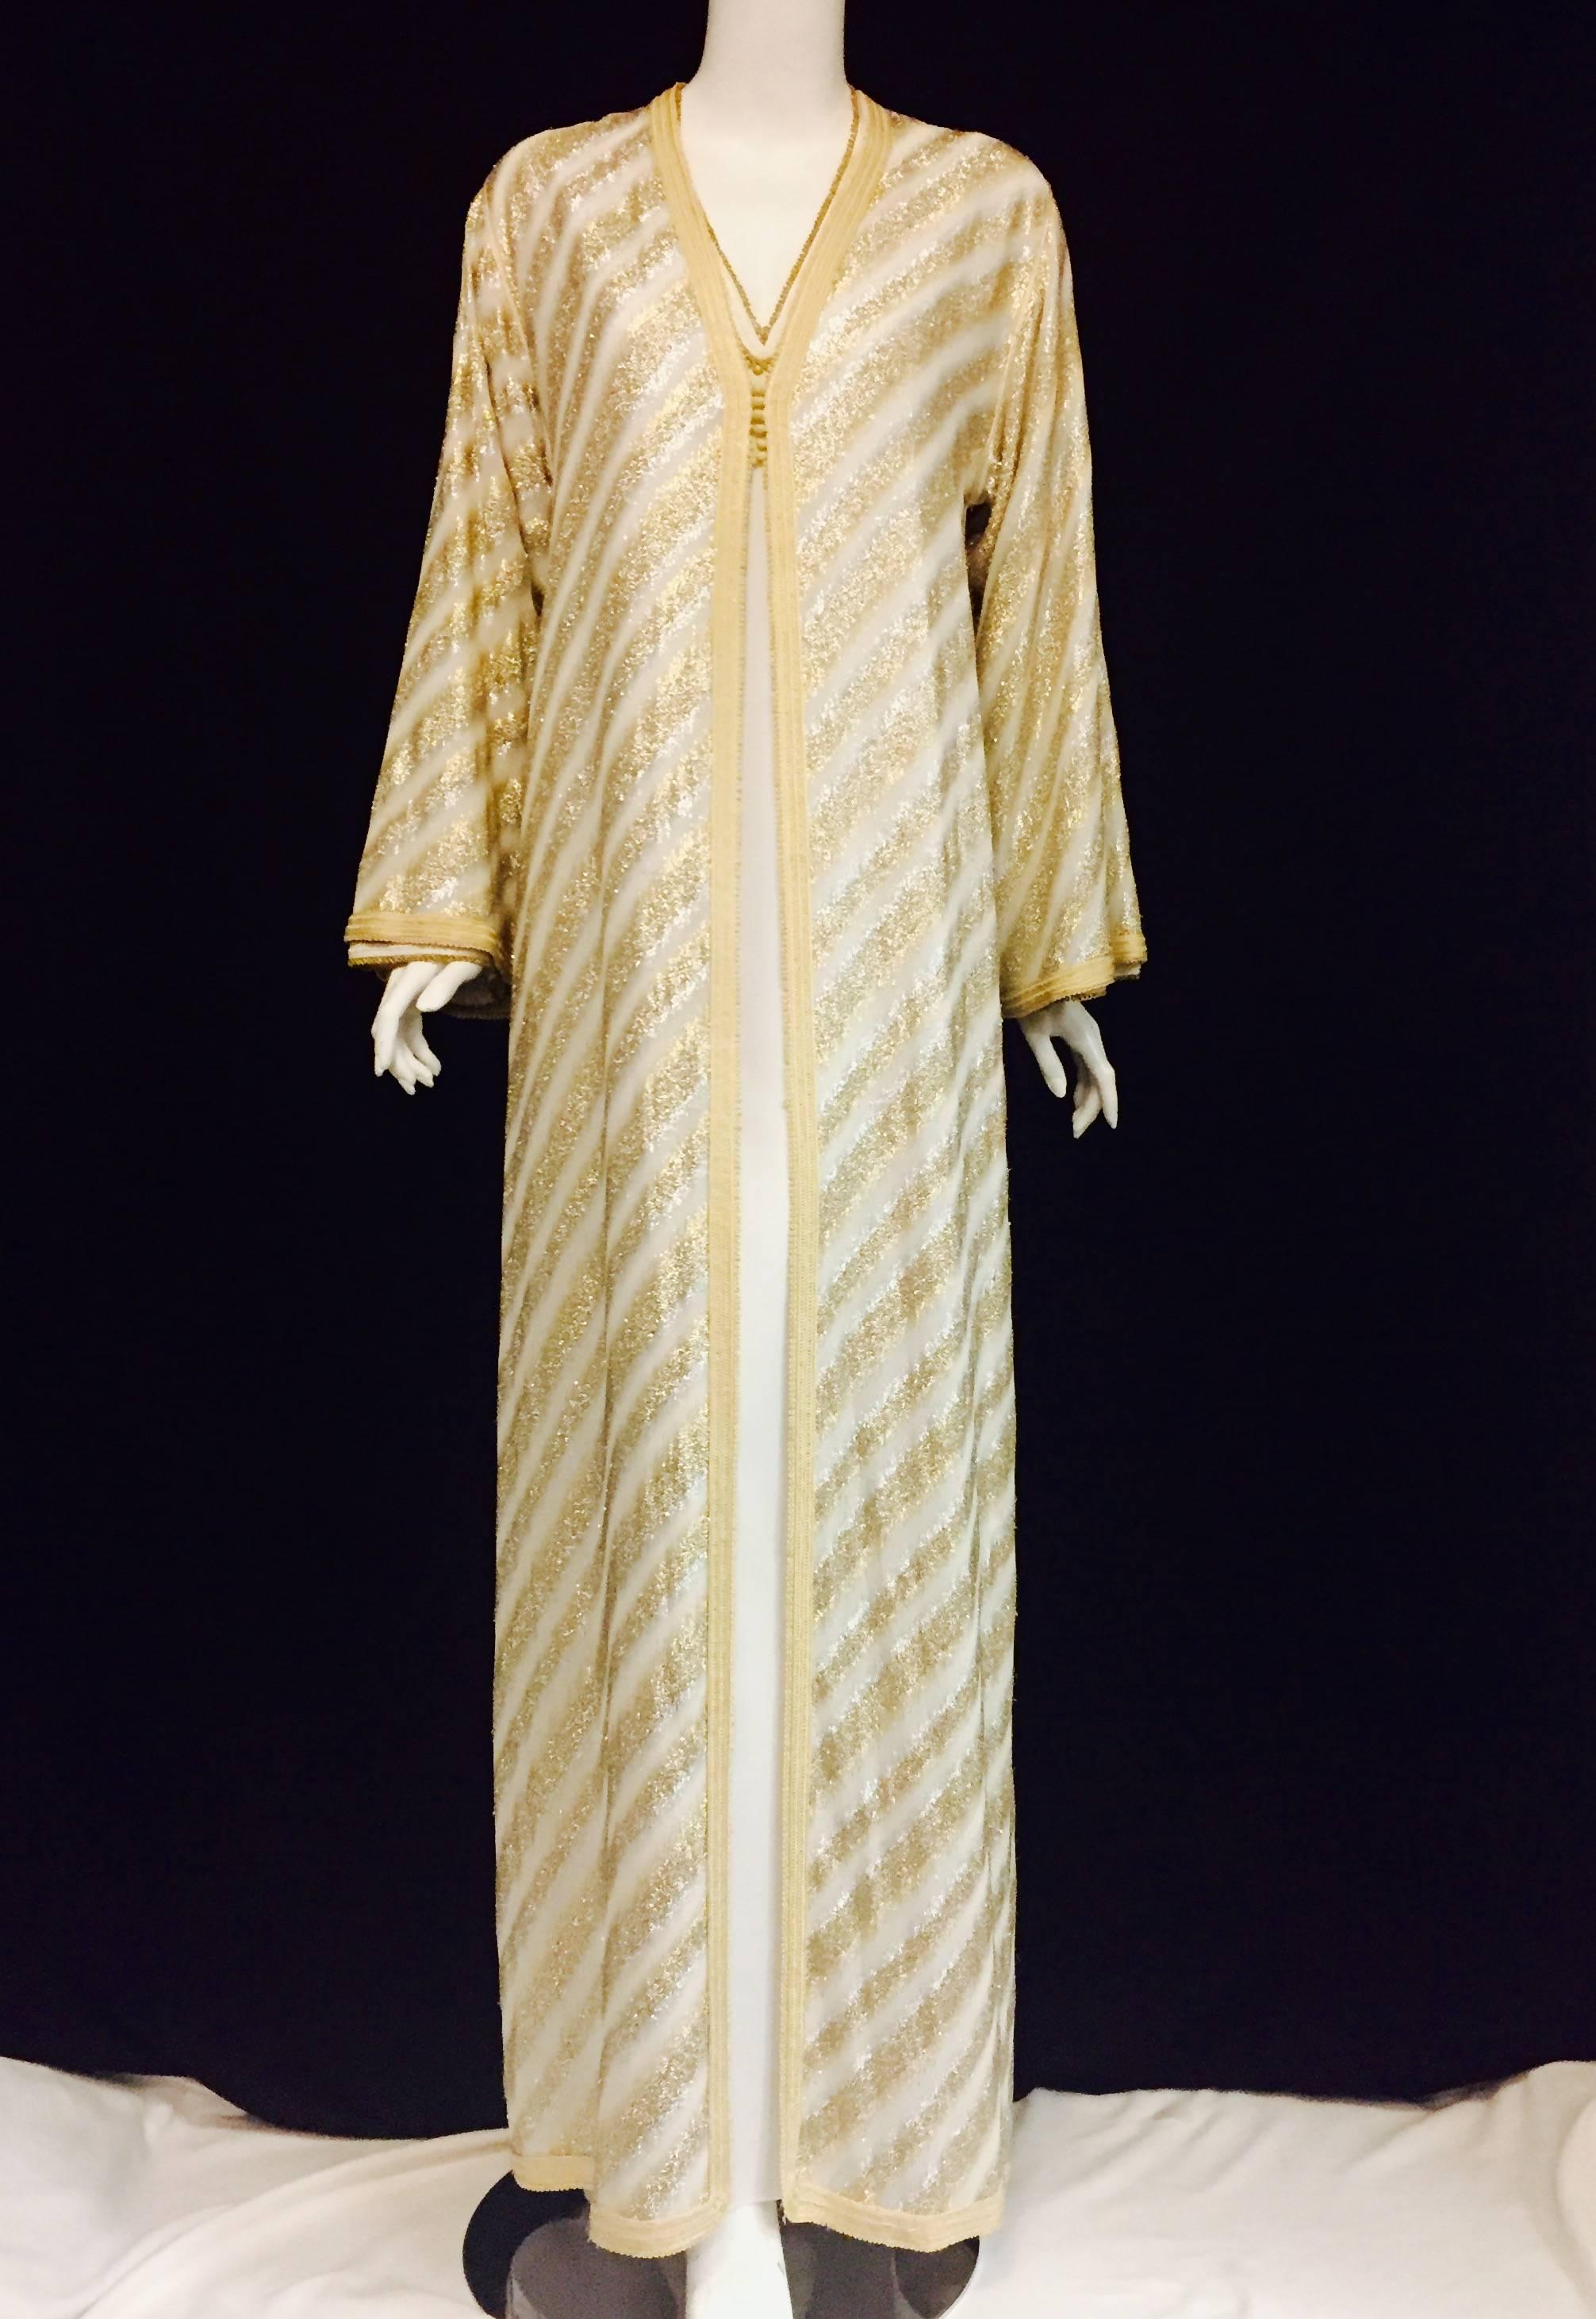 Vintage Celine Paris 2-piece Caftan ensemble is crafted from exquisite white and gold lame.  The inner dress is white silk with gold tone grecian style cord on neckline and at cuffs of long sleeves.  The outer dress/coat is constructed with white